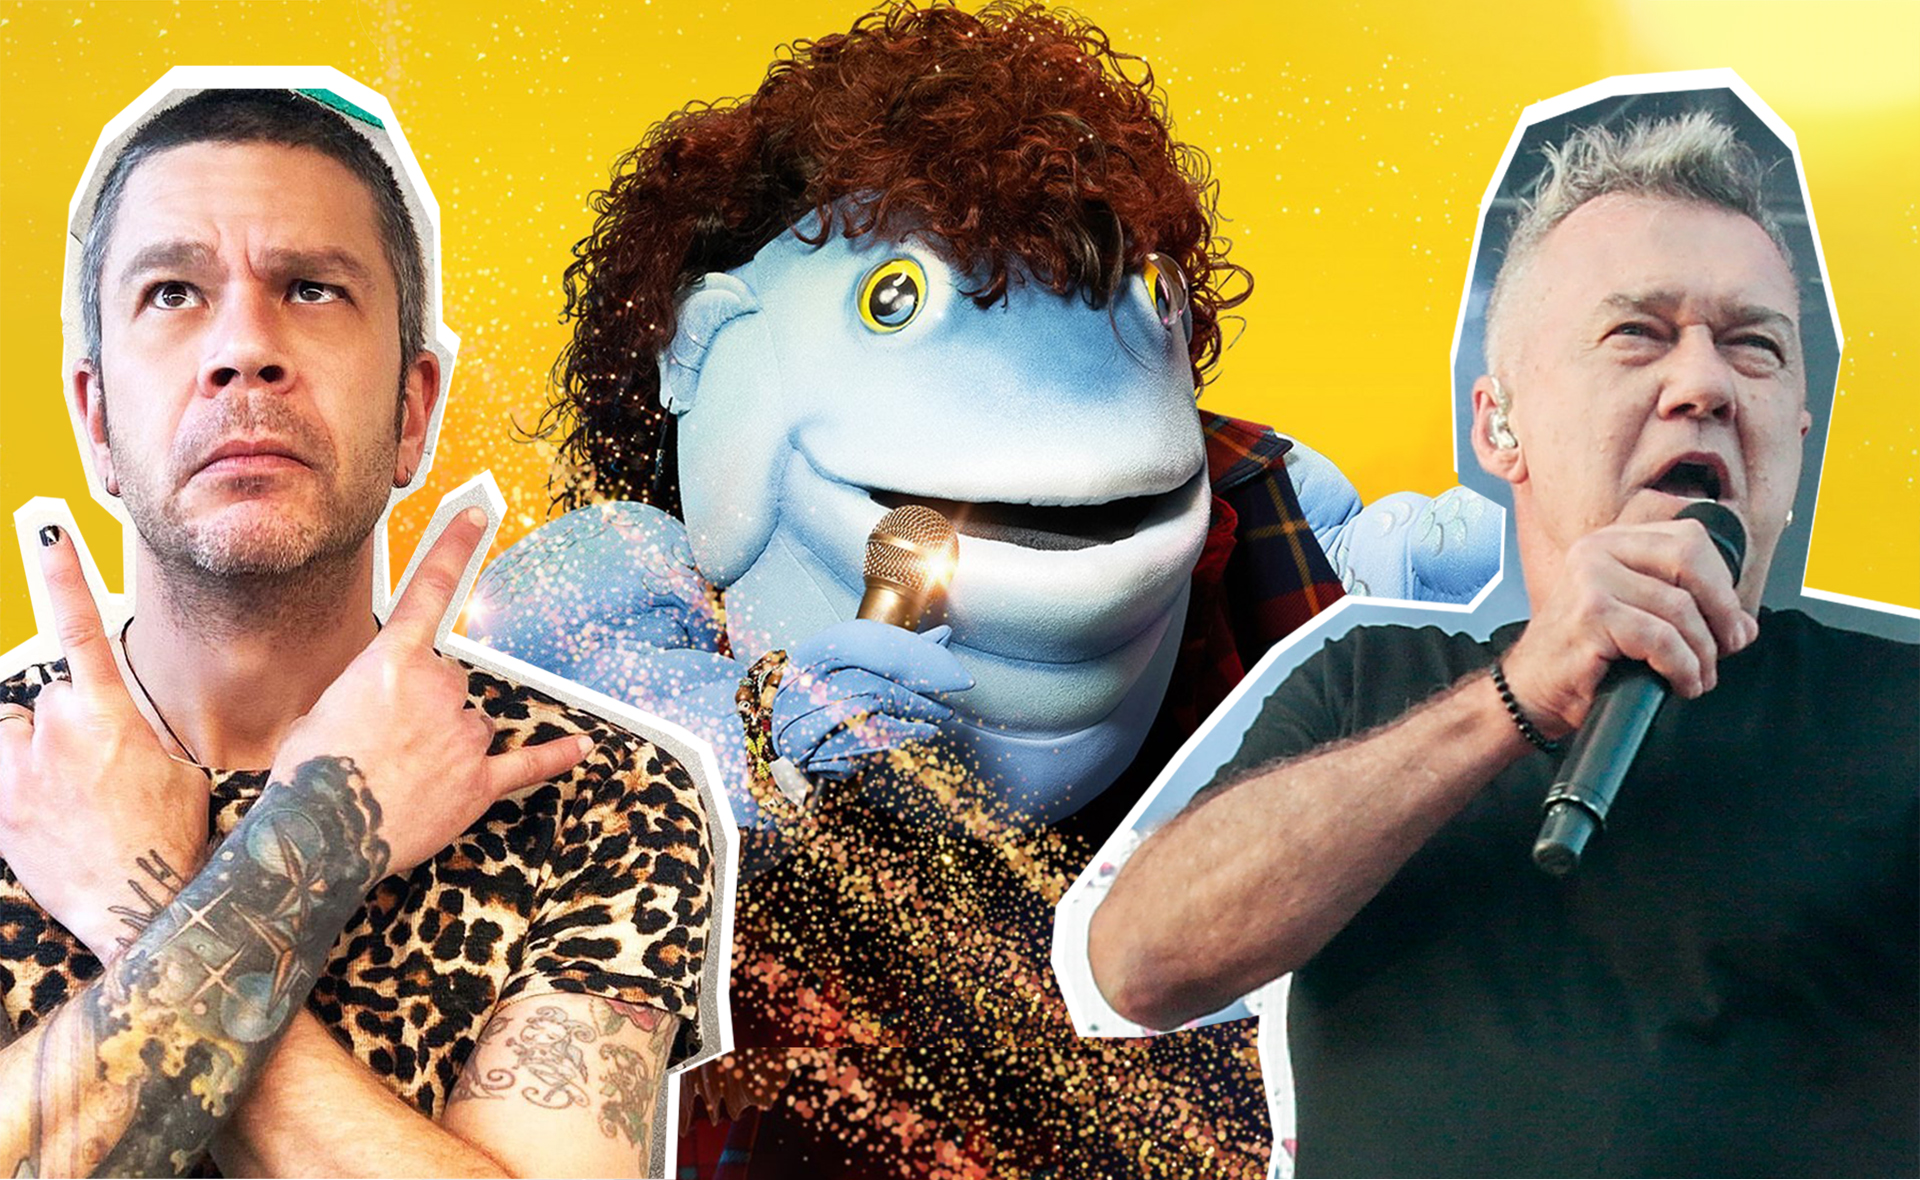 Who is behind the Mullet mask on The Masked Singer Australia? We might already know